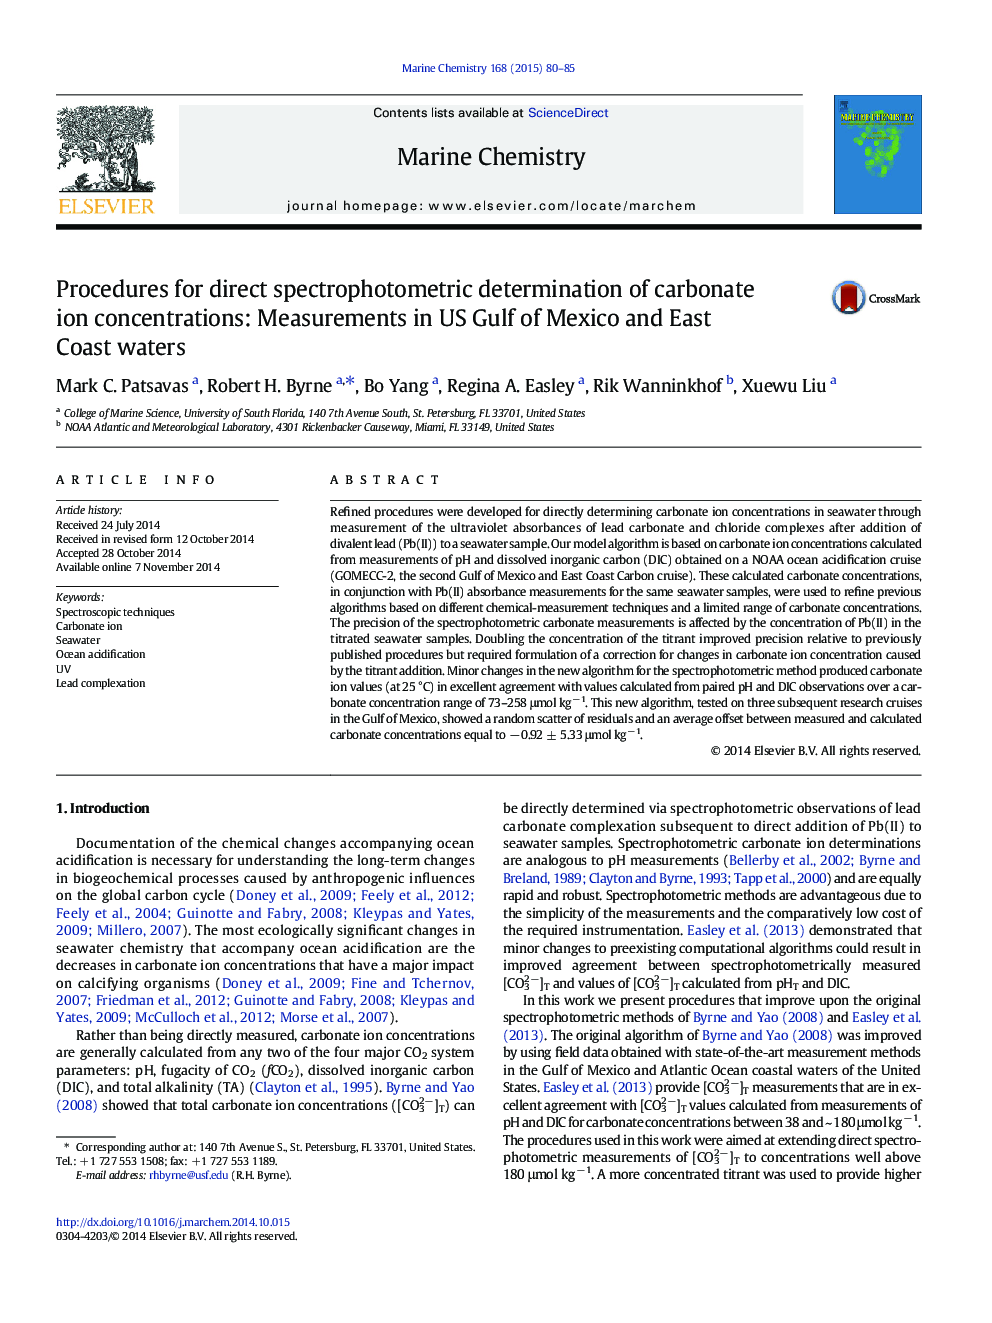 Procedures for direct spectrophotometric determination of carbonate ion concentrations: Measurements in US Gulf of Mexico and East Coast waters